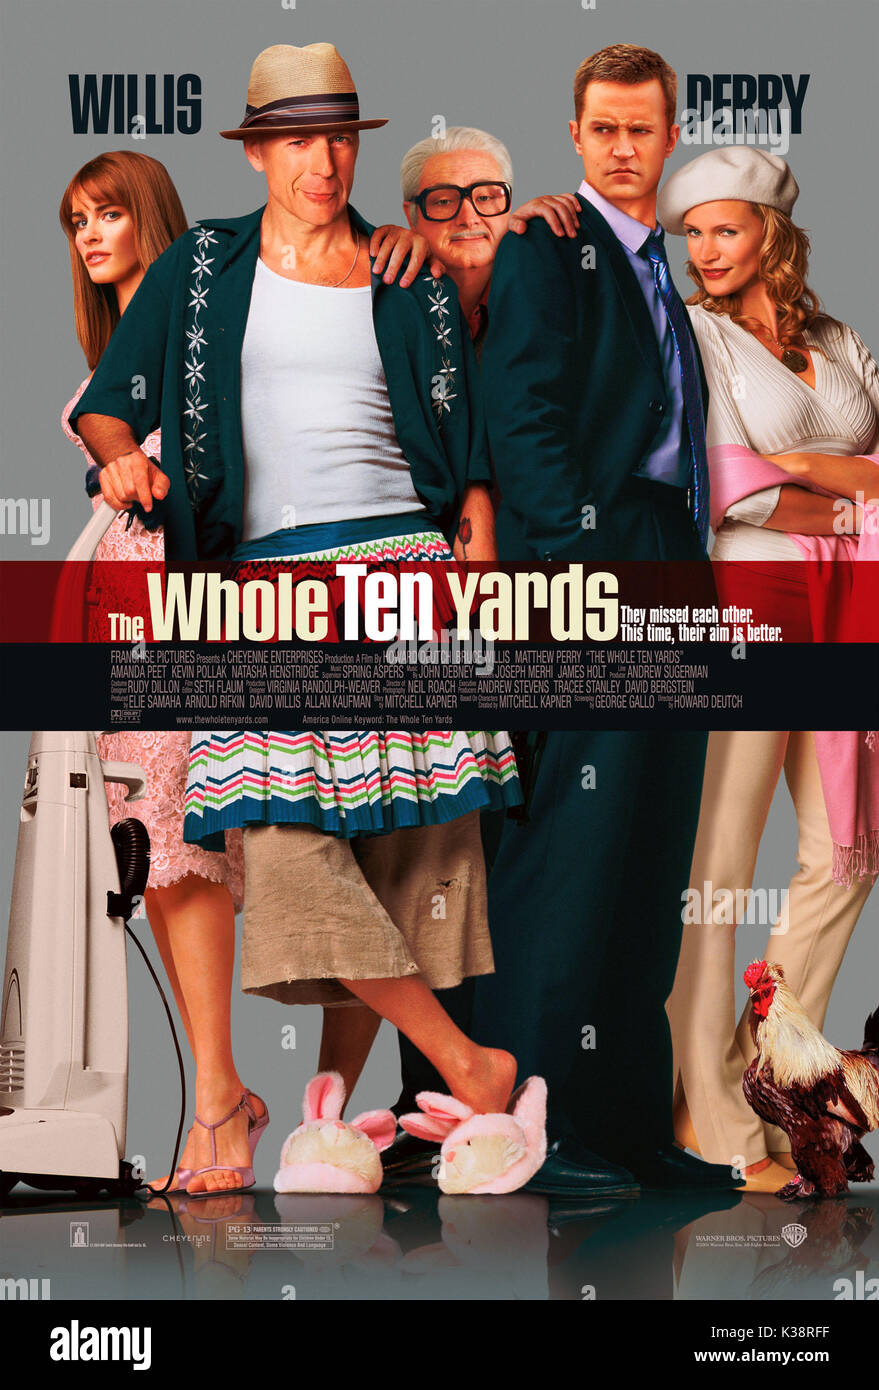 PHOTOGRAPHS TO BE USED SOLELY FOR ADVERTISING, PROMOTION, PUBLICITY OR REVIEWS OF THIS SPECIFIC MOTION PICTURE AND TO REMAIN THE PROPERTY OF THE STUDIO. NOT FOR SALE OR REDISTRIBUTION. THE WHOLE TEN YARDS      Date: 2004 Stock Photo